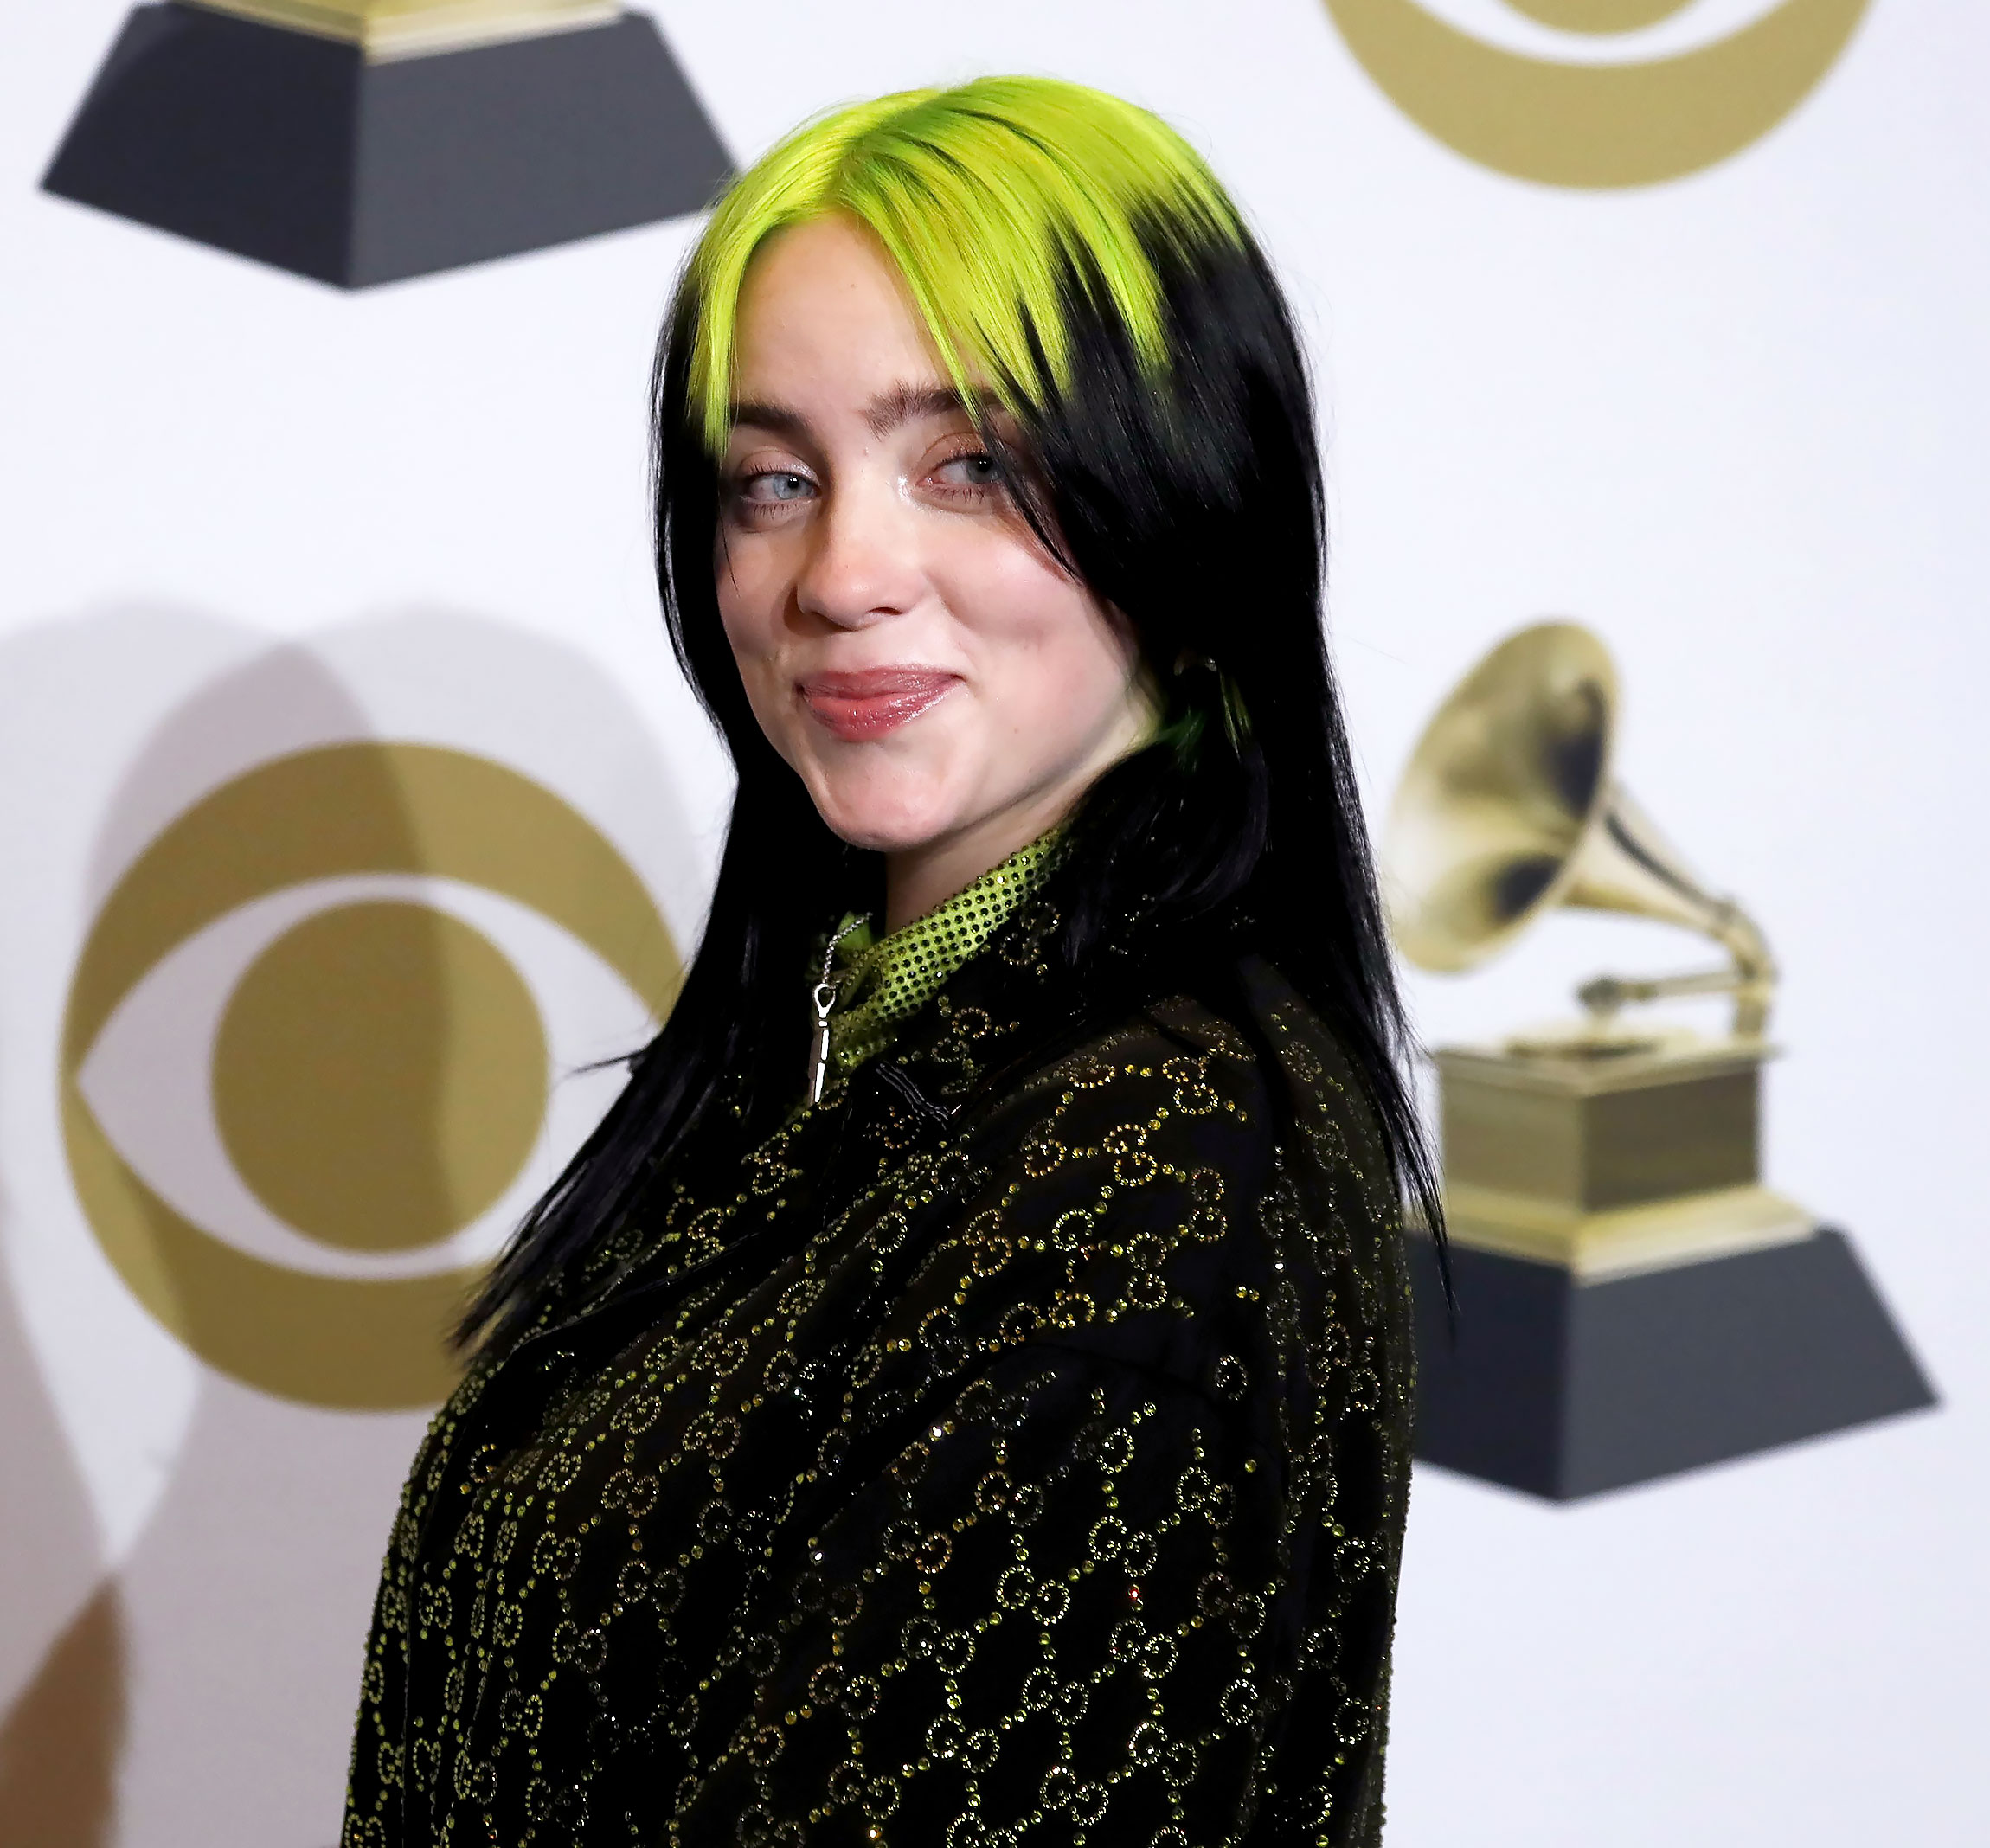 Billie Eilish Claps Back at Haters Who 'Make Fun' of Her ...